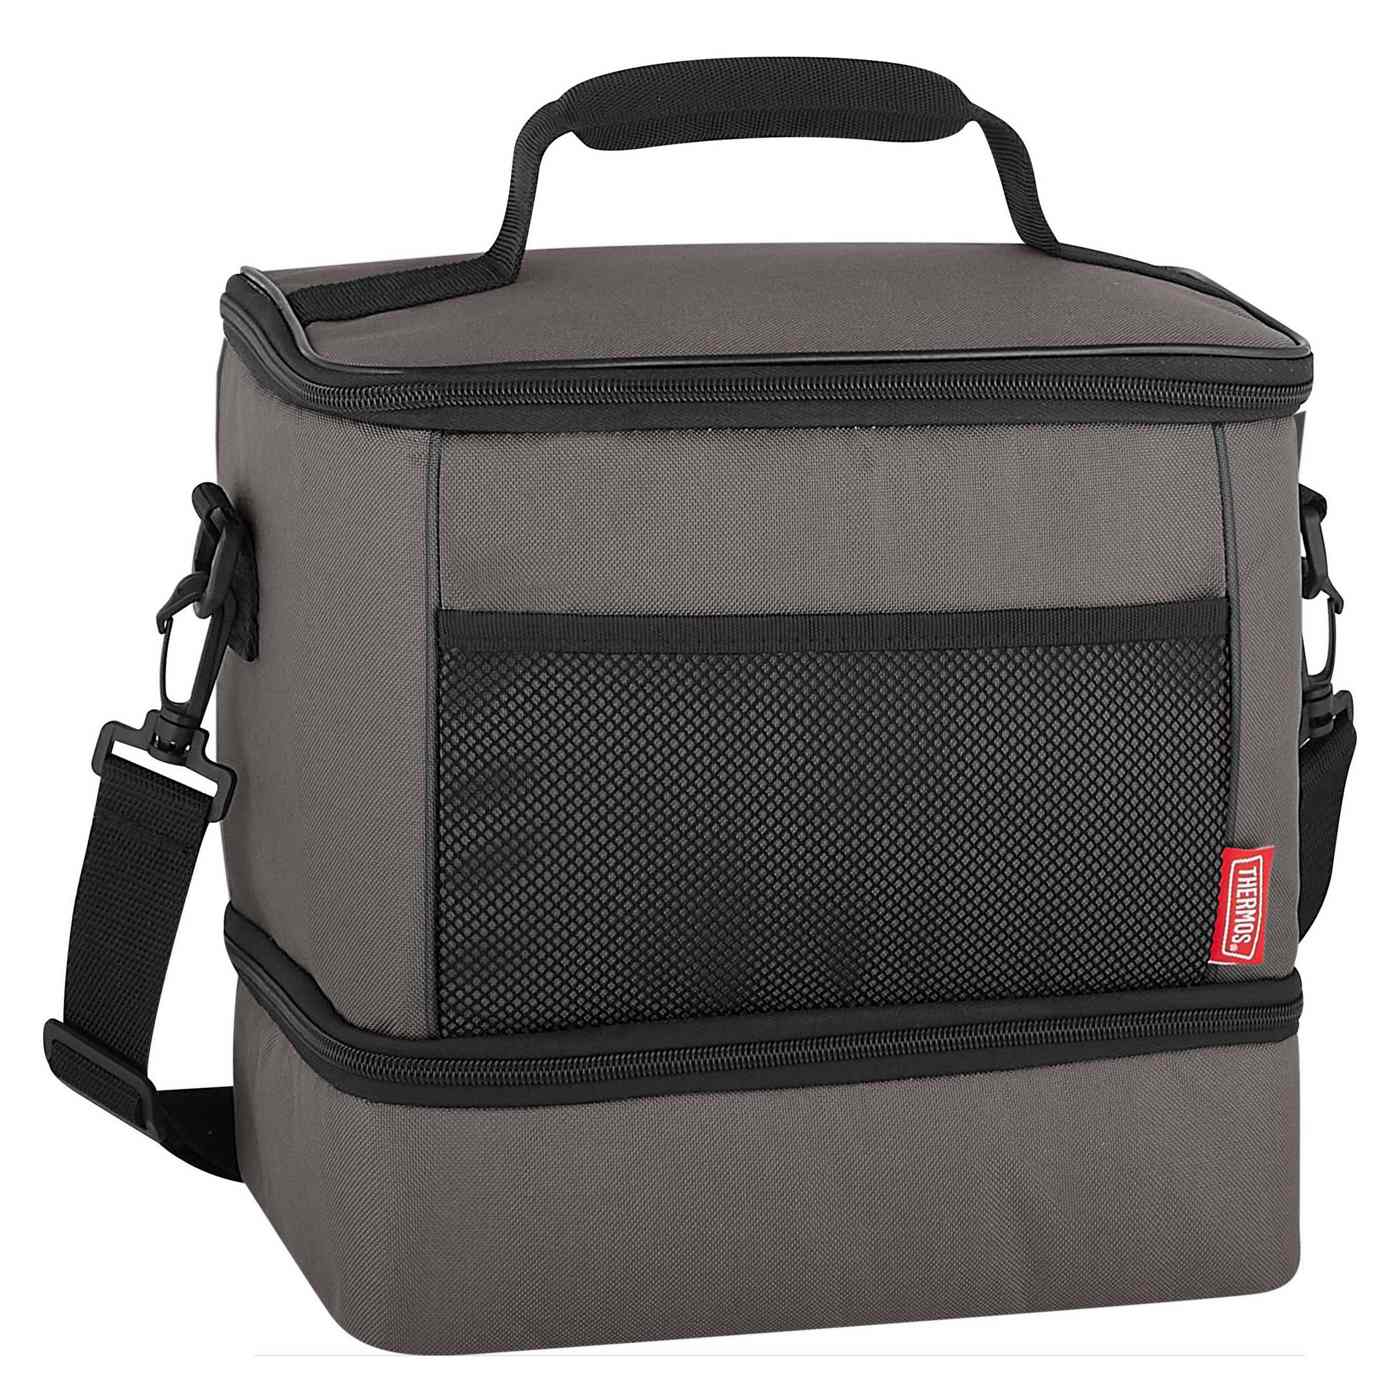 Thermos Lunch Lugger - Gray; image 2 of 3